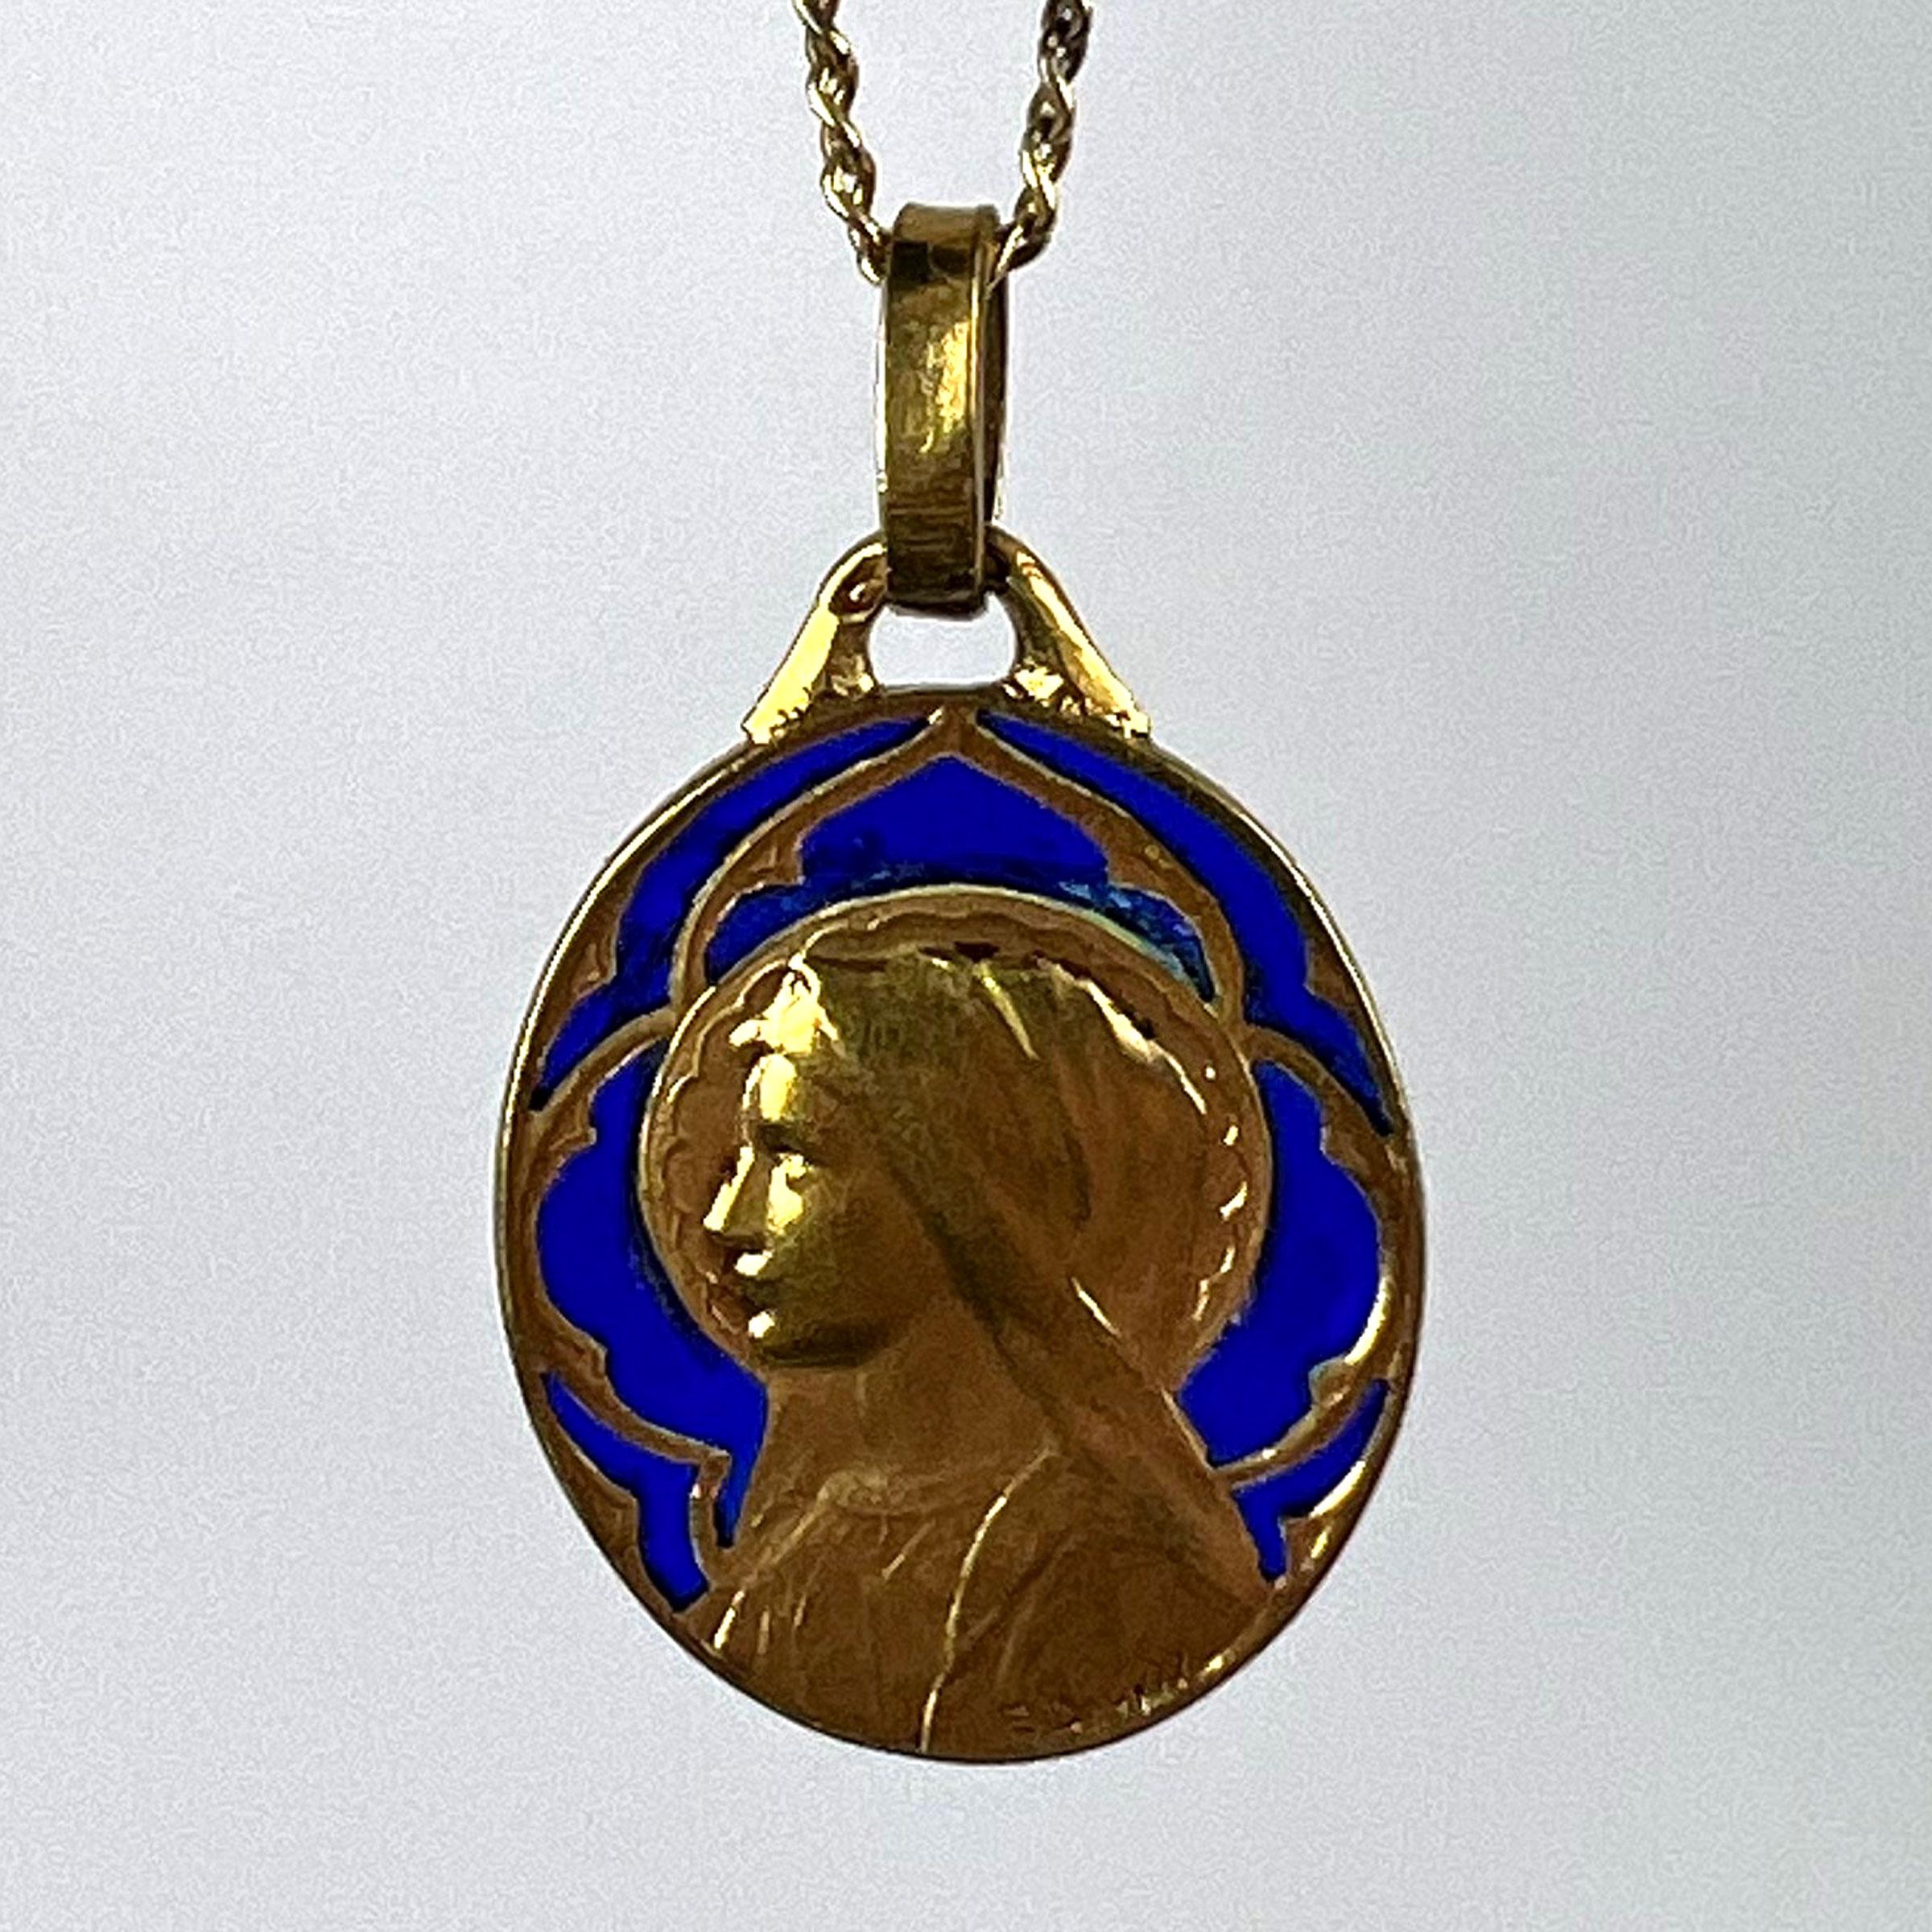 French Dropsy Virgin Mary Plique A Jour Enamel 18K Yellow Gold Pendant Medal In Good Condition For Sale In London, GB